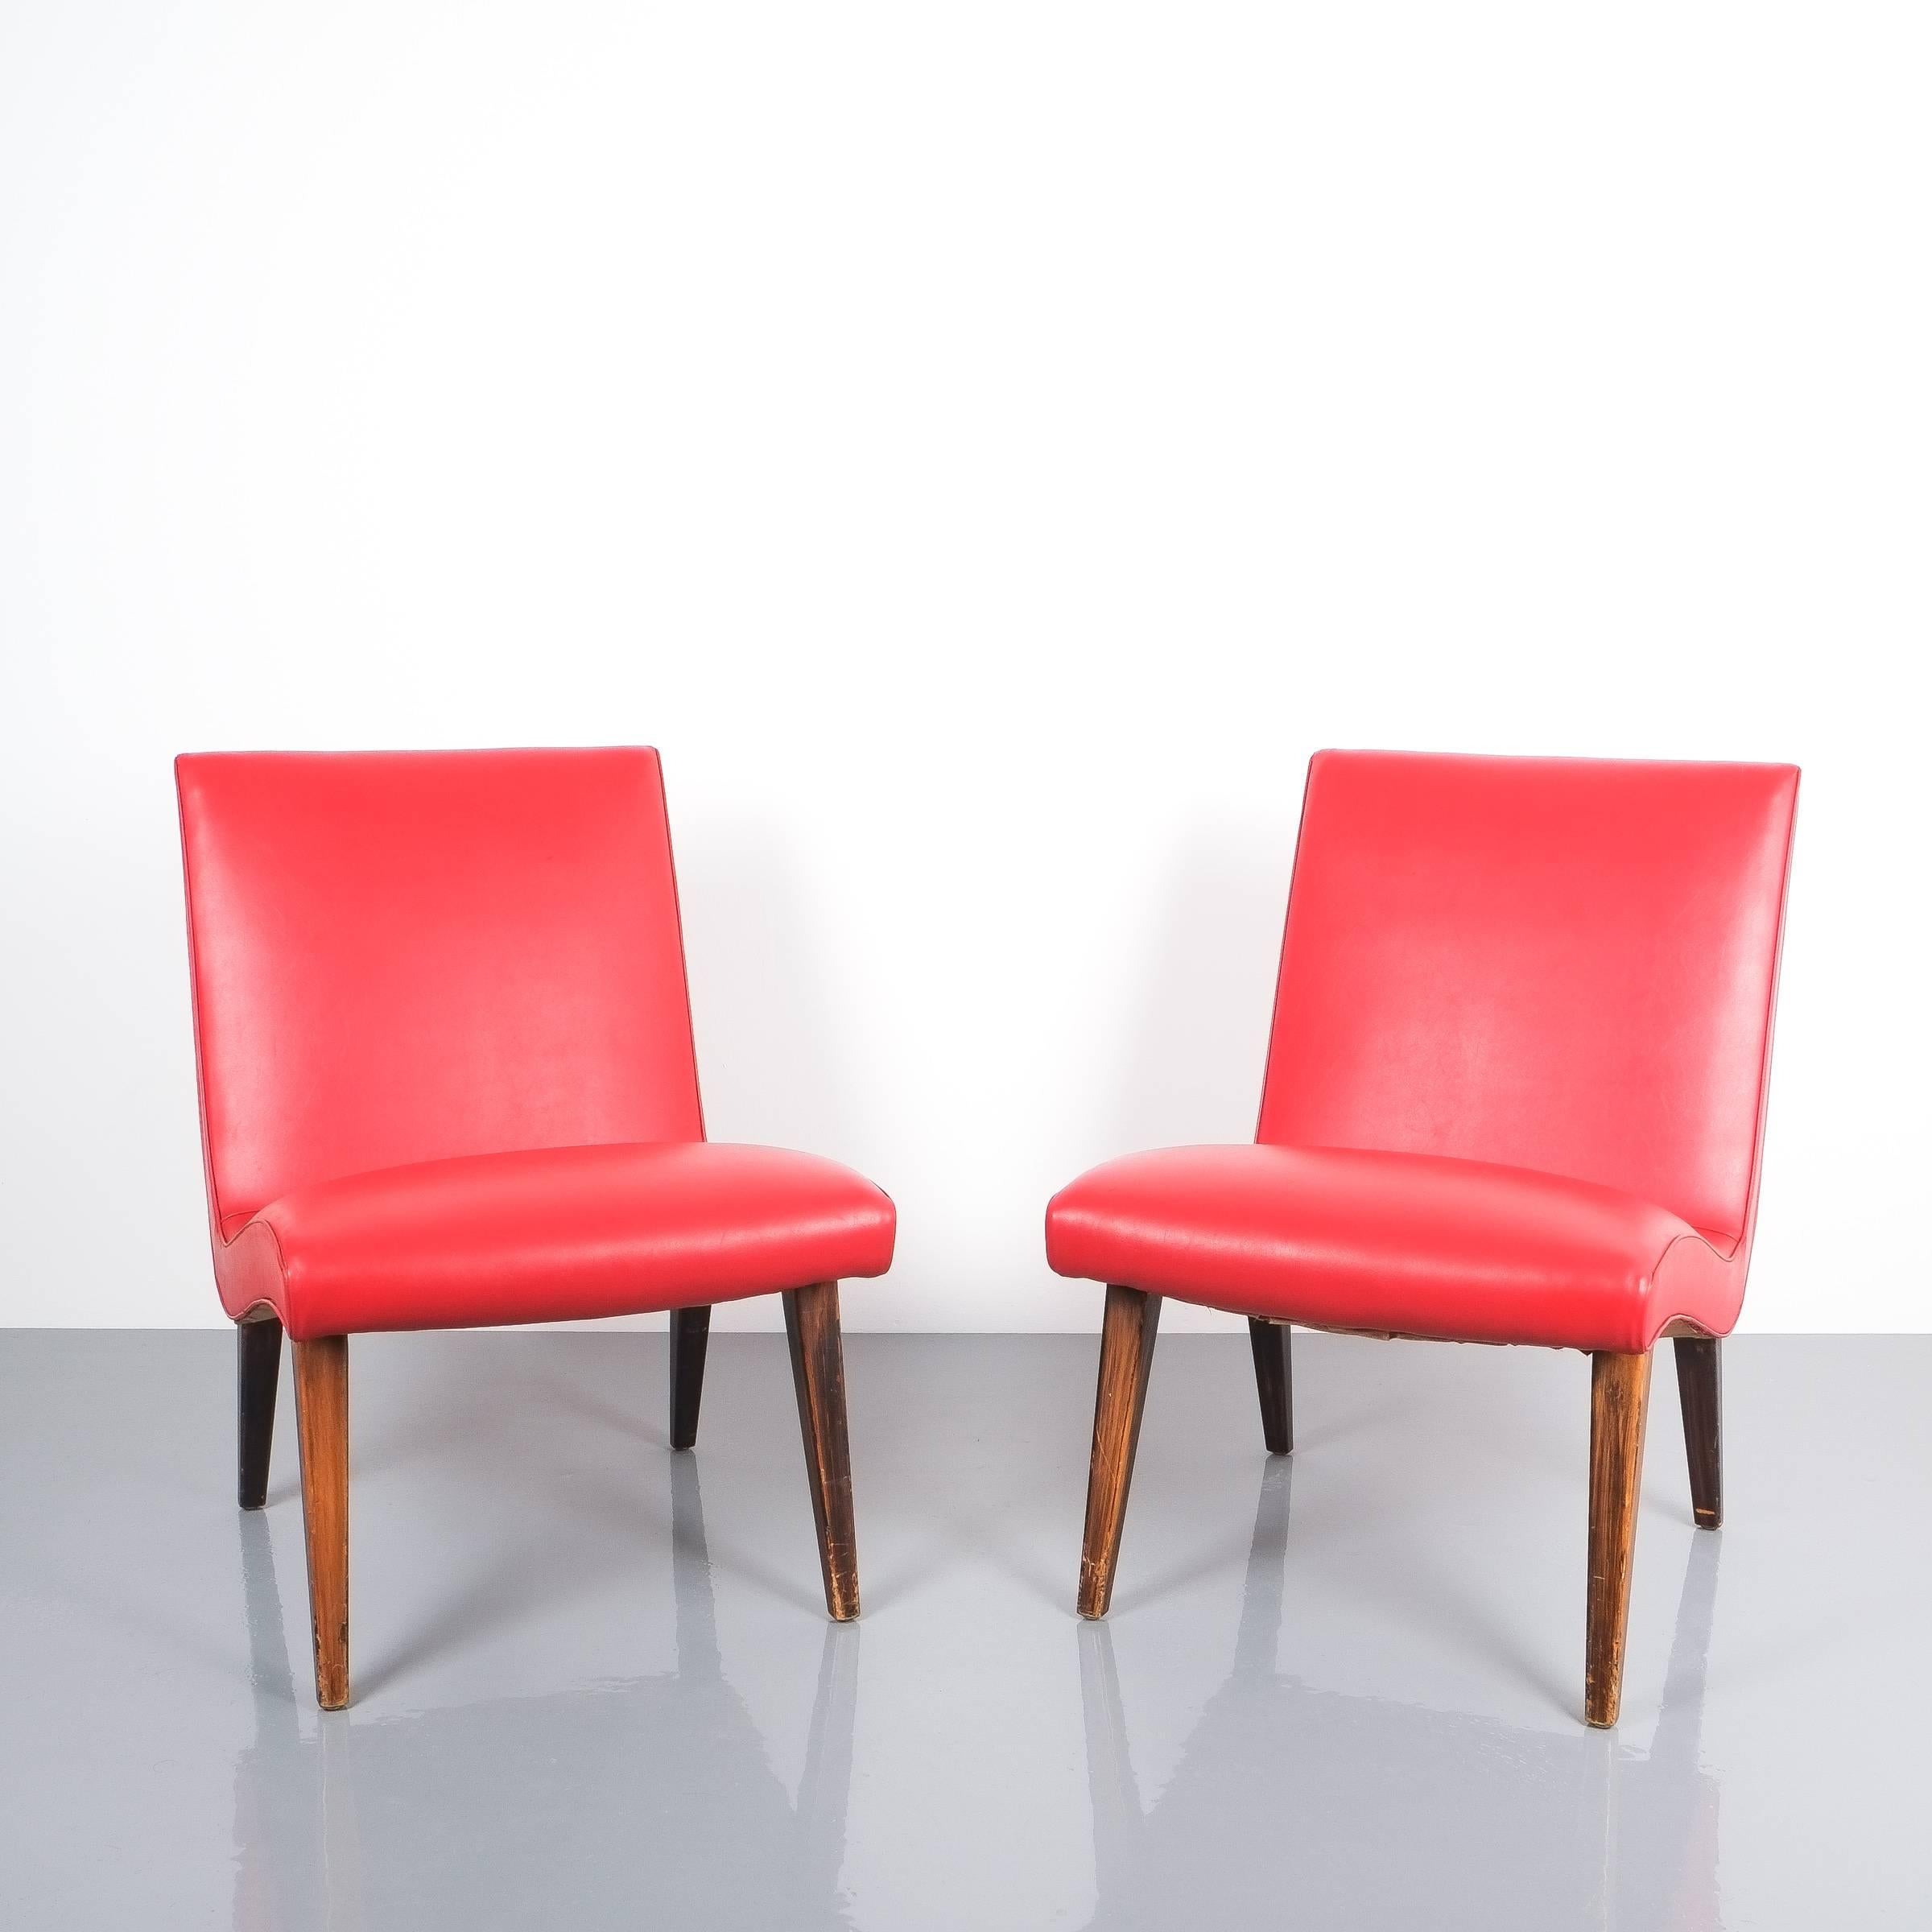 Dutch Jens Risom Pair of Red Vinyl Faux Leather Chairs 1950 For Sale